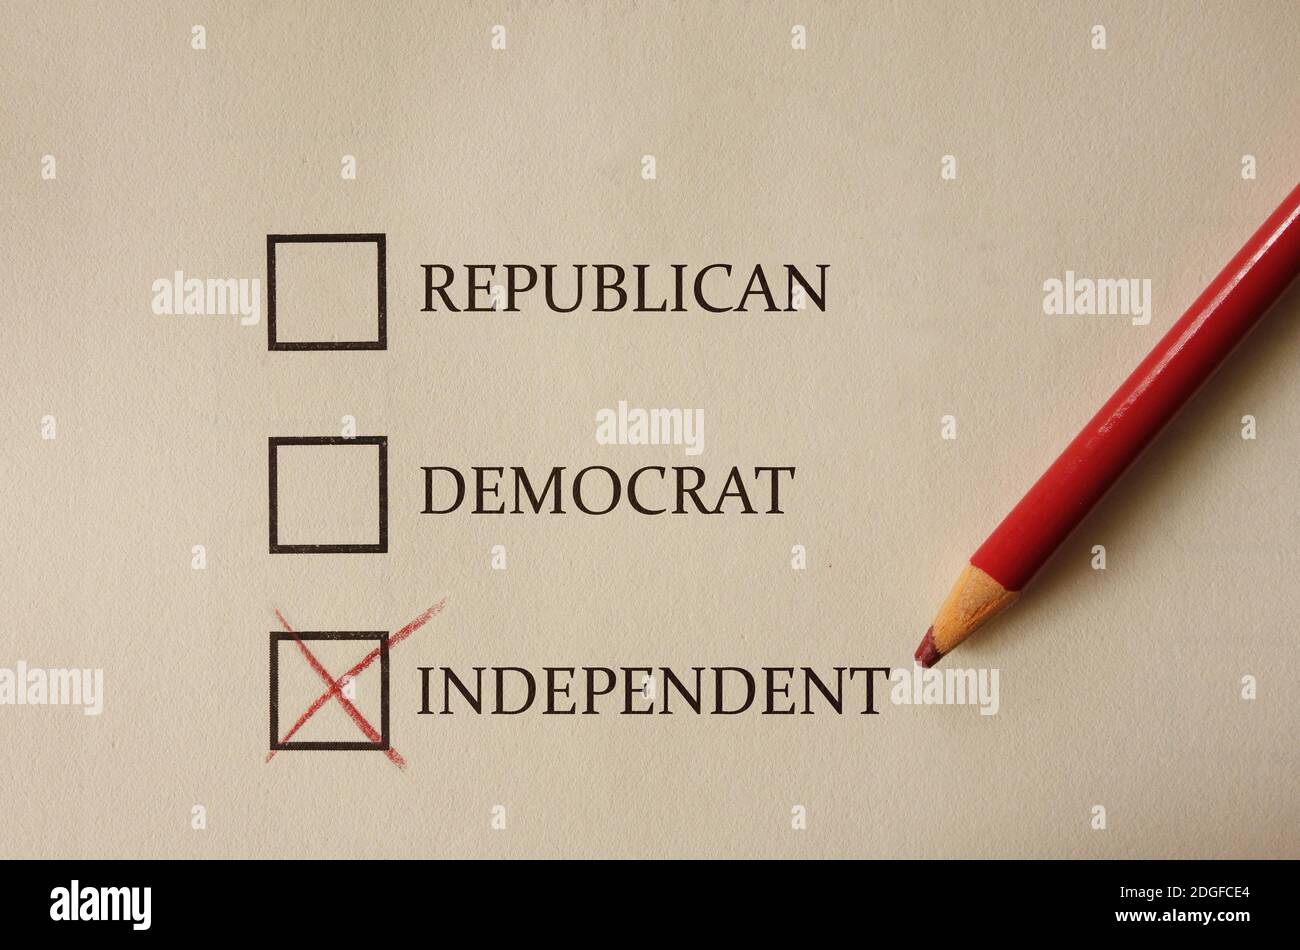 Republican Democrat and Independent voting form Stock Photo